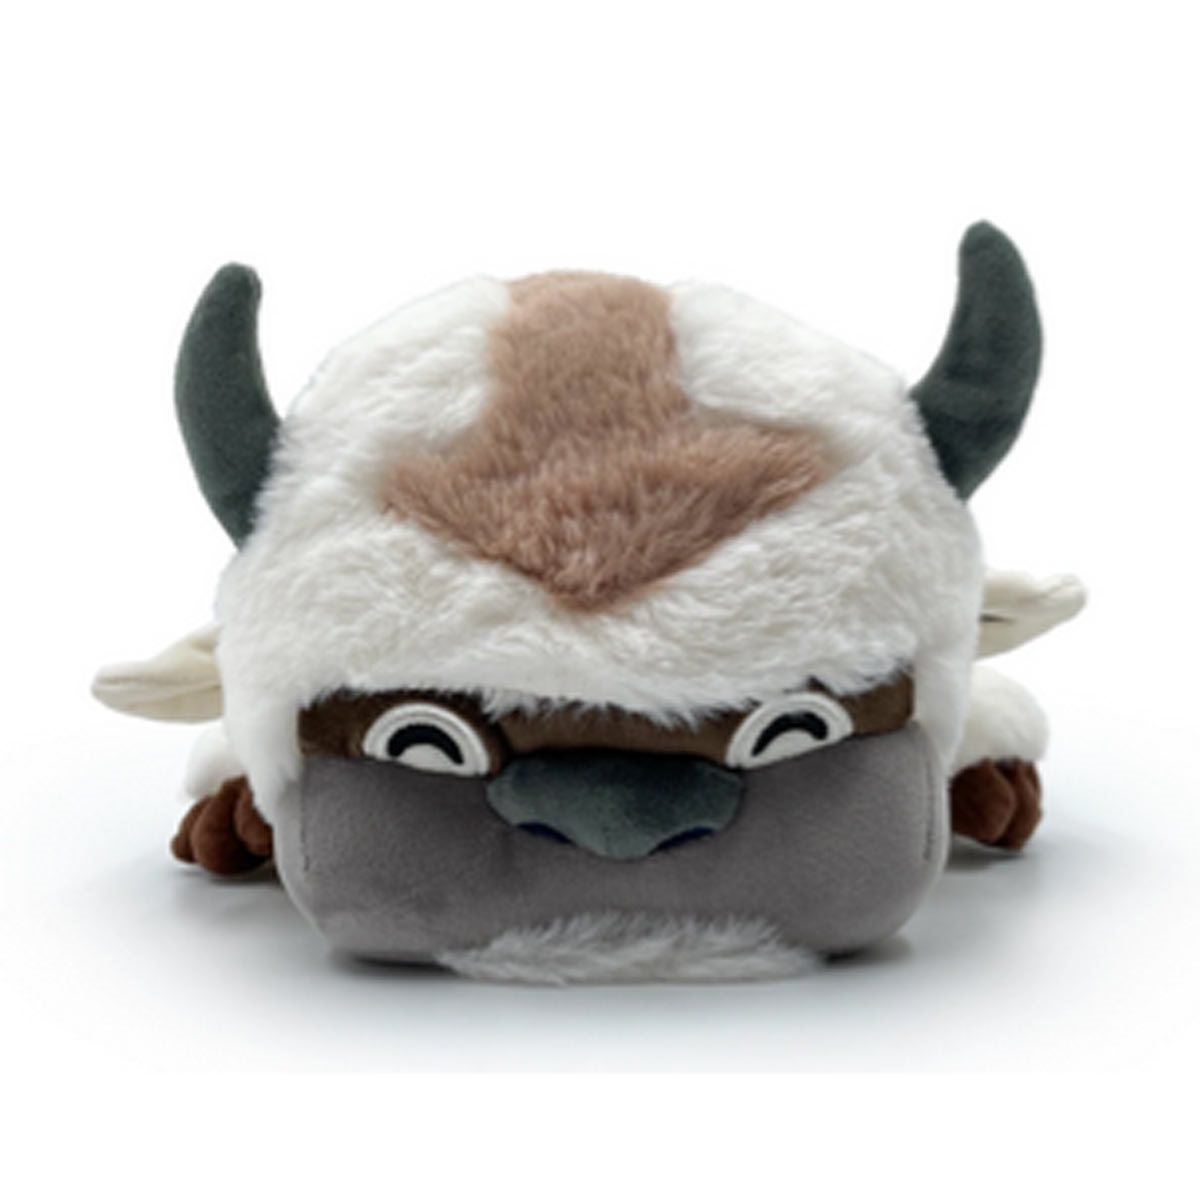 New 20 Inch Big Size Avatar The Last Airbender Appa Plush Toy  Avatar The Last  Airbender Store